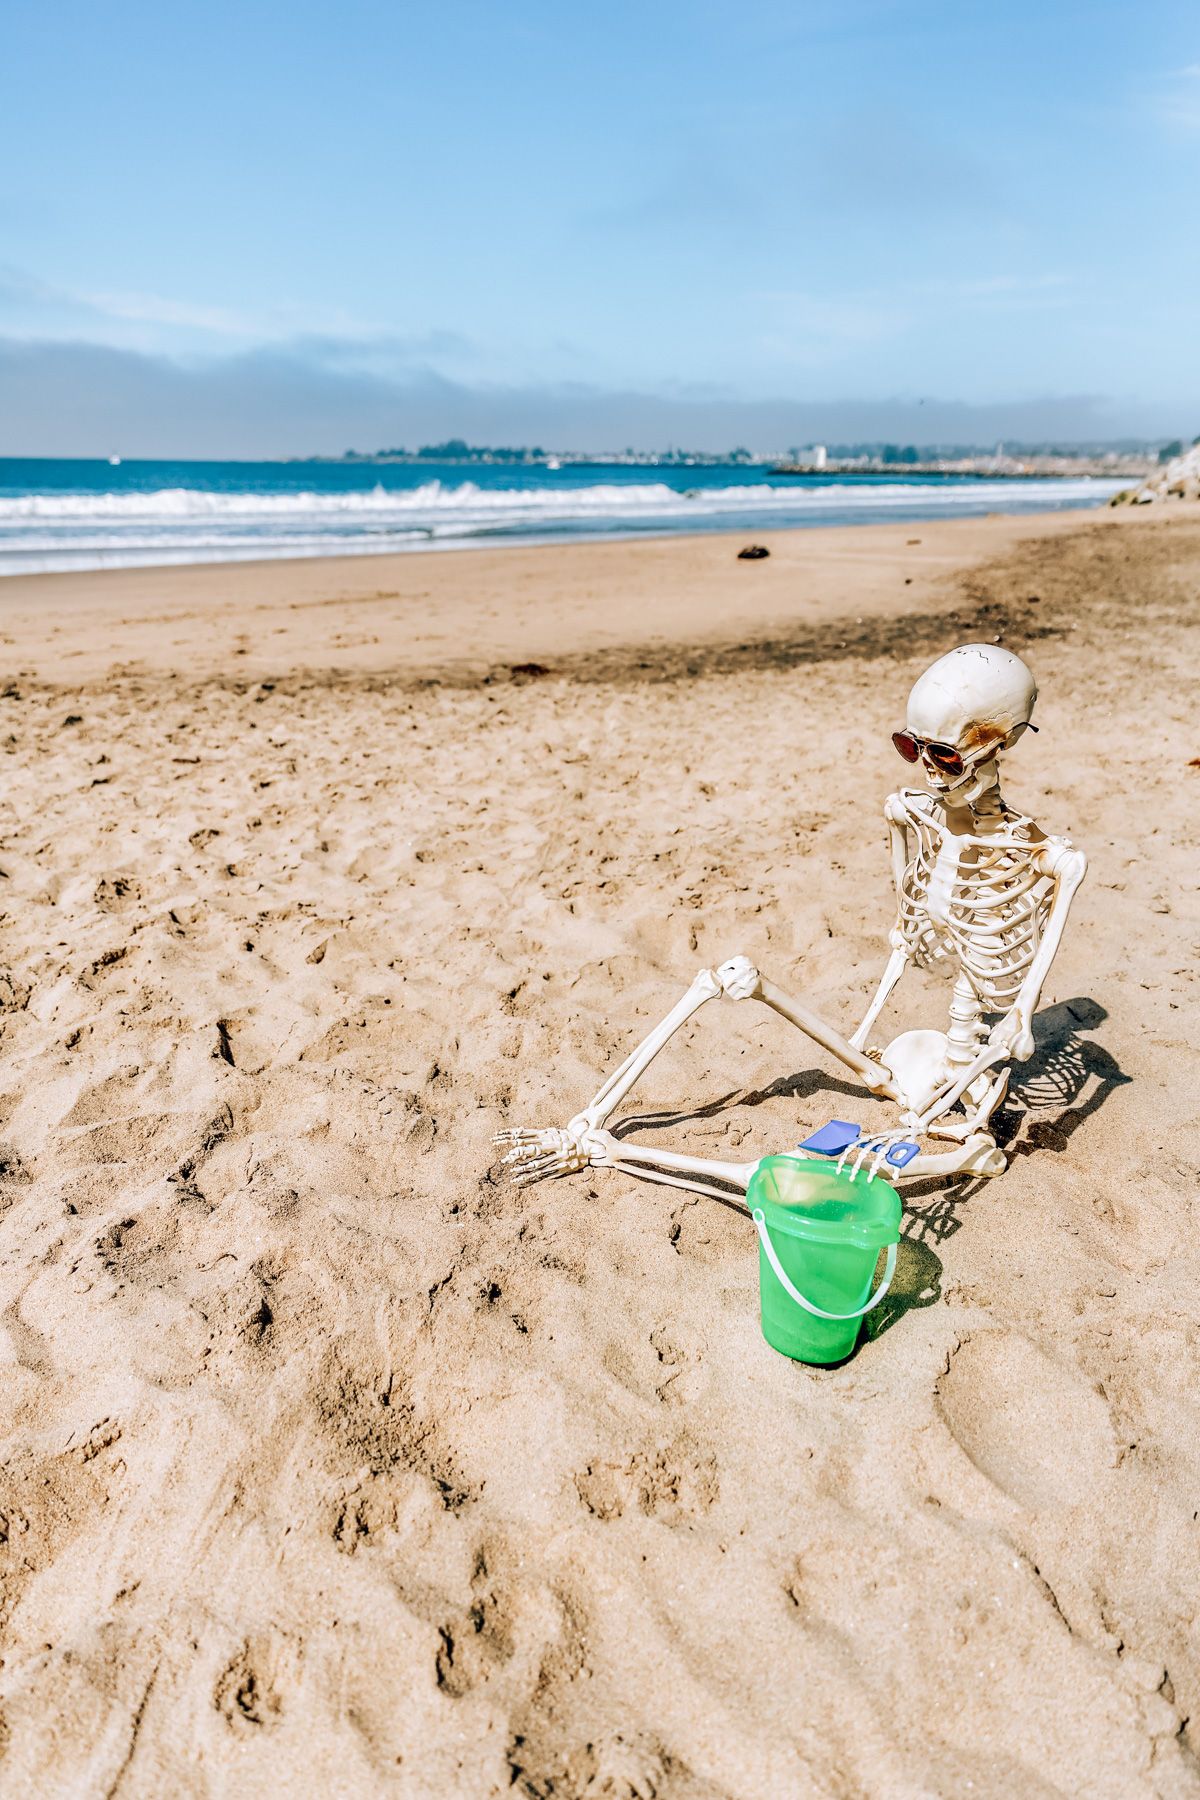 Halloween Events in San Diego: a skeleton wearing sunglasses posed sitting on a a Southern California beach, with a bucket and shovel in hand.